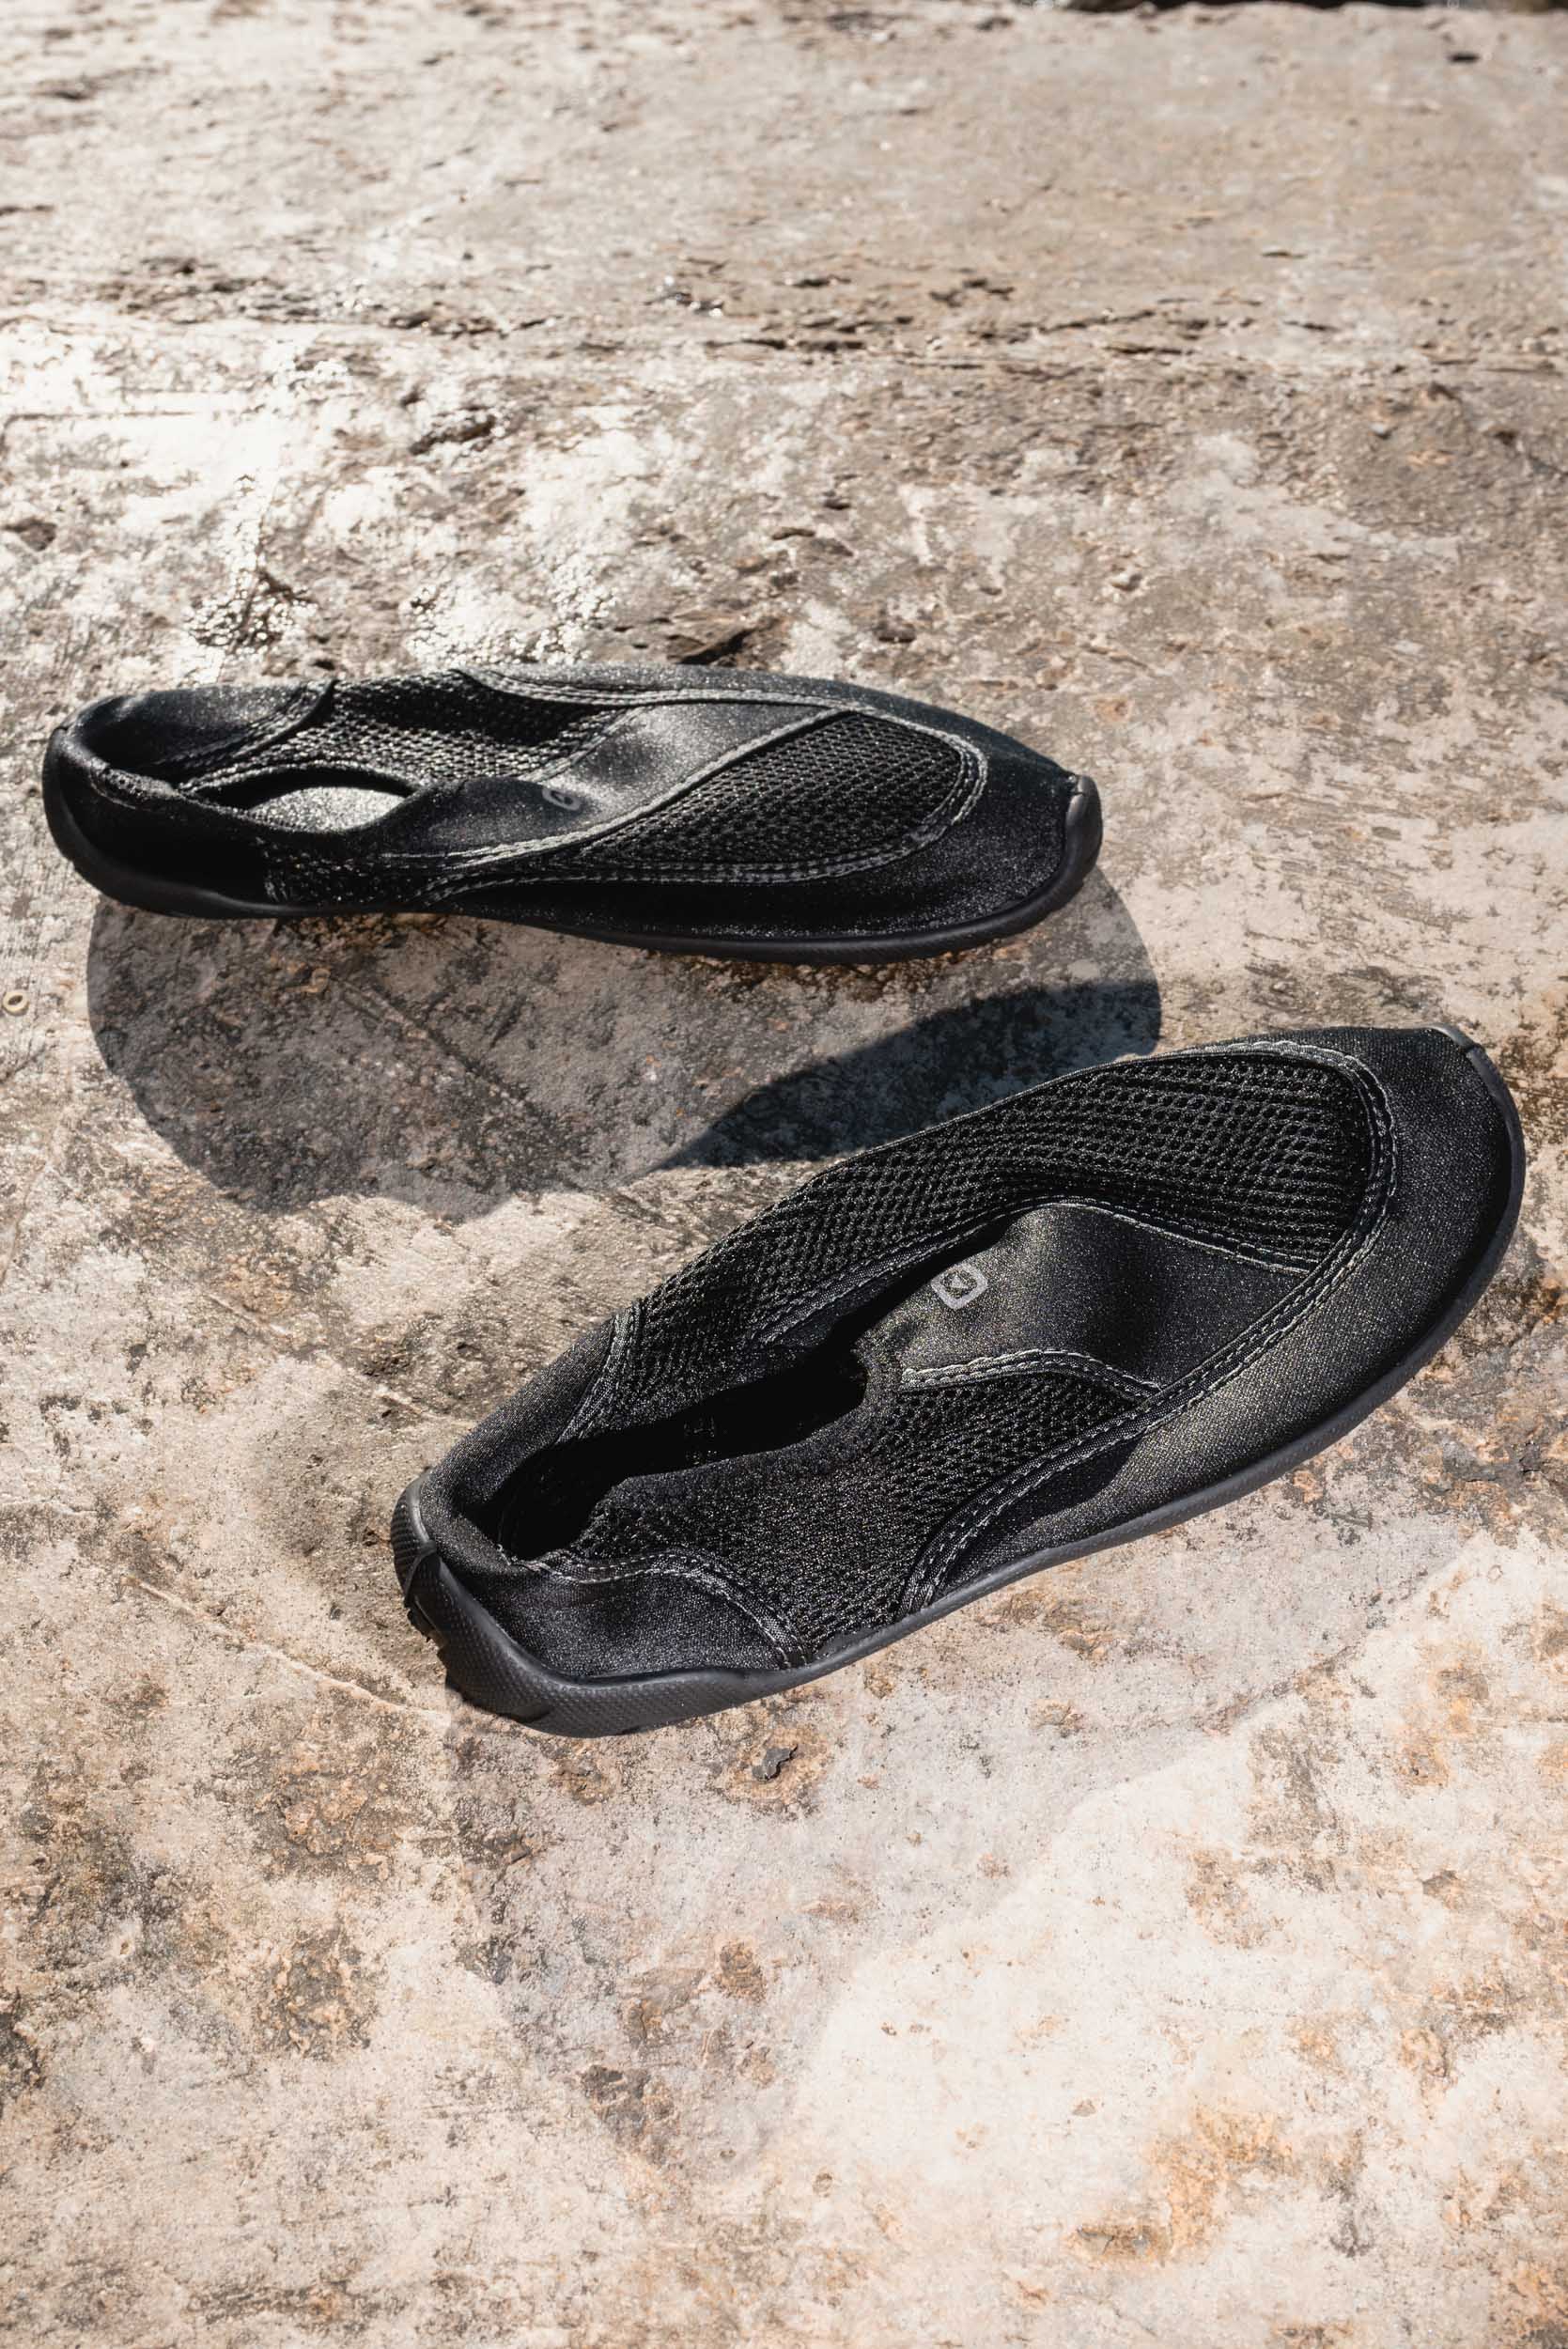 Wet water shoes on cement